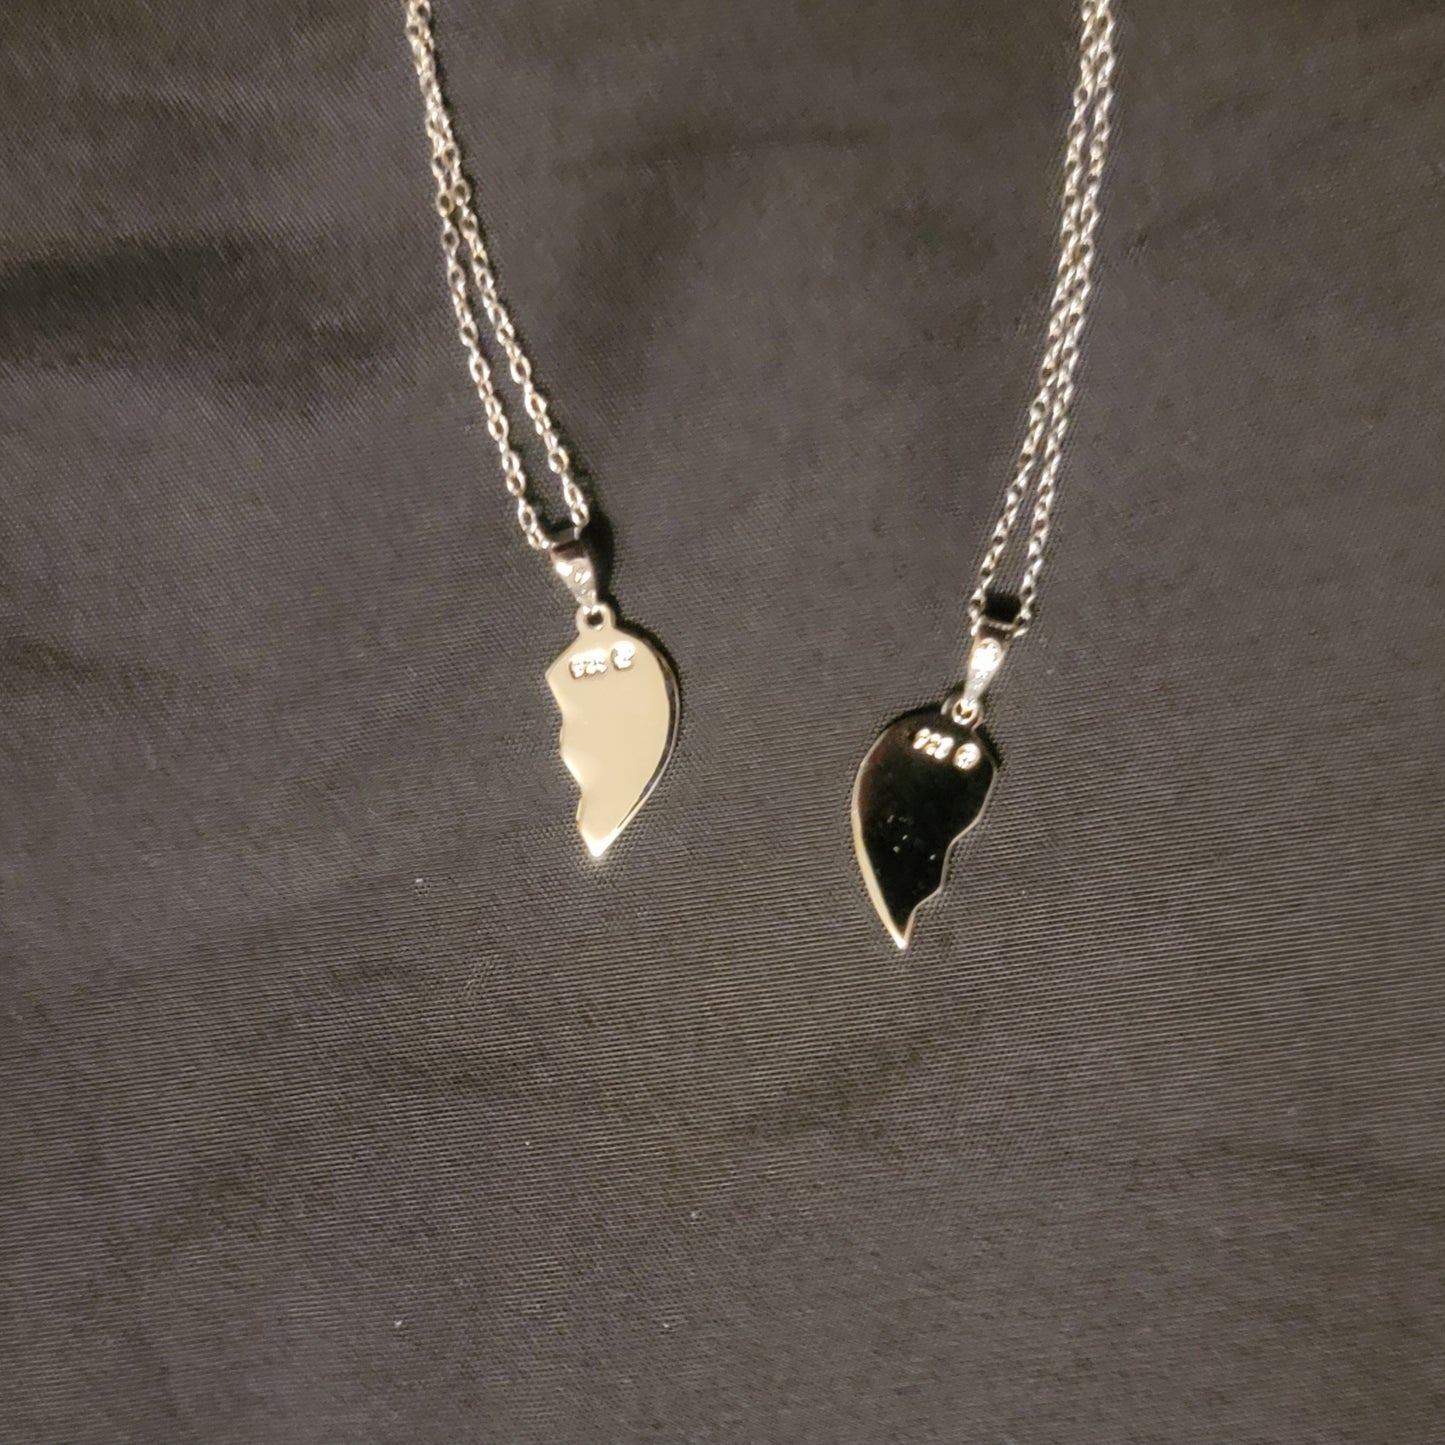 Two Necklace with Heart Pieces. Pendant Engraved with Forever Yours